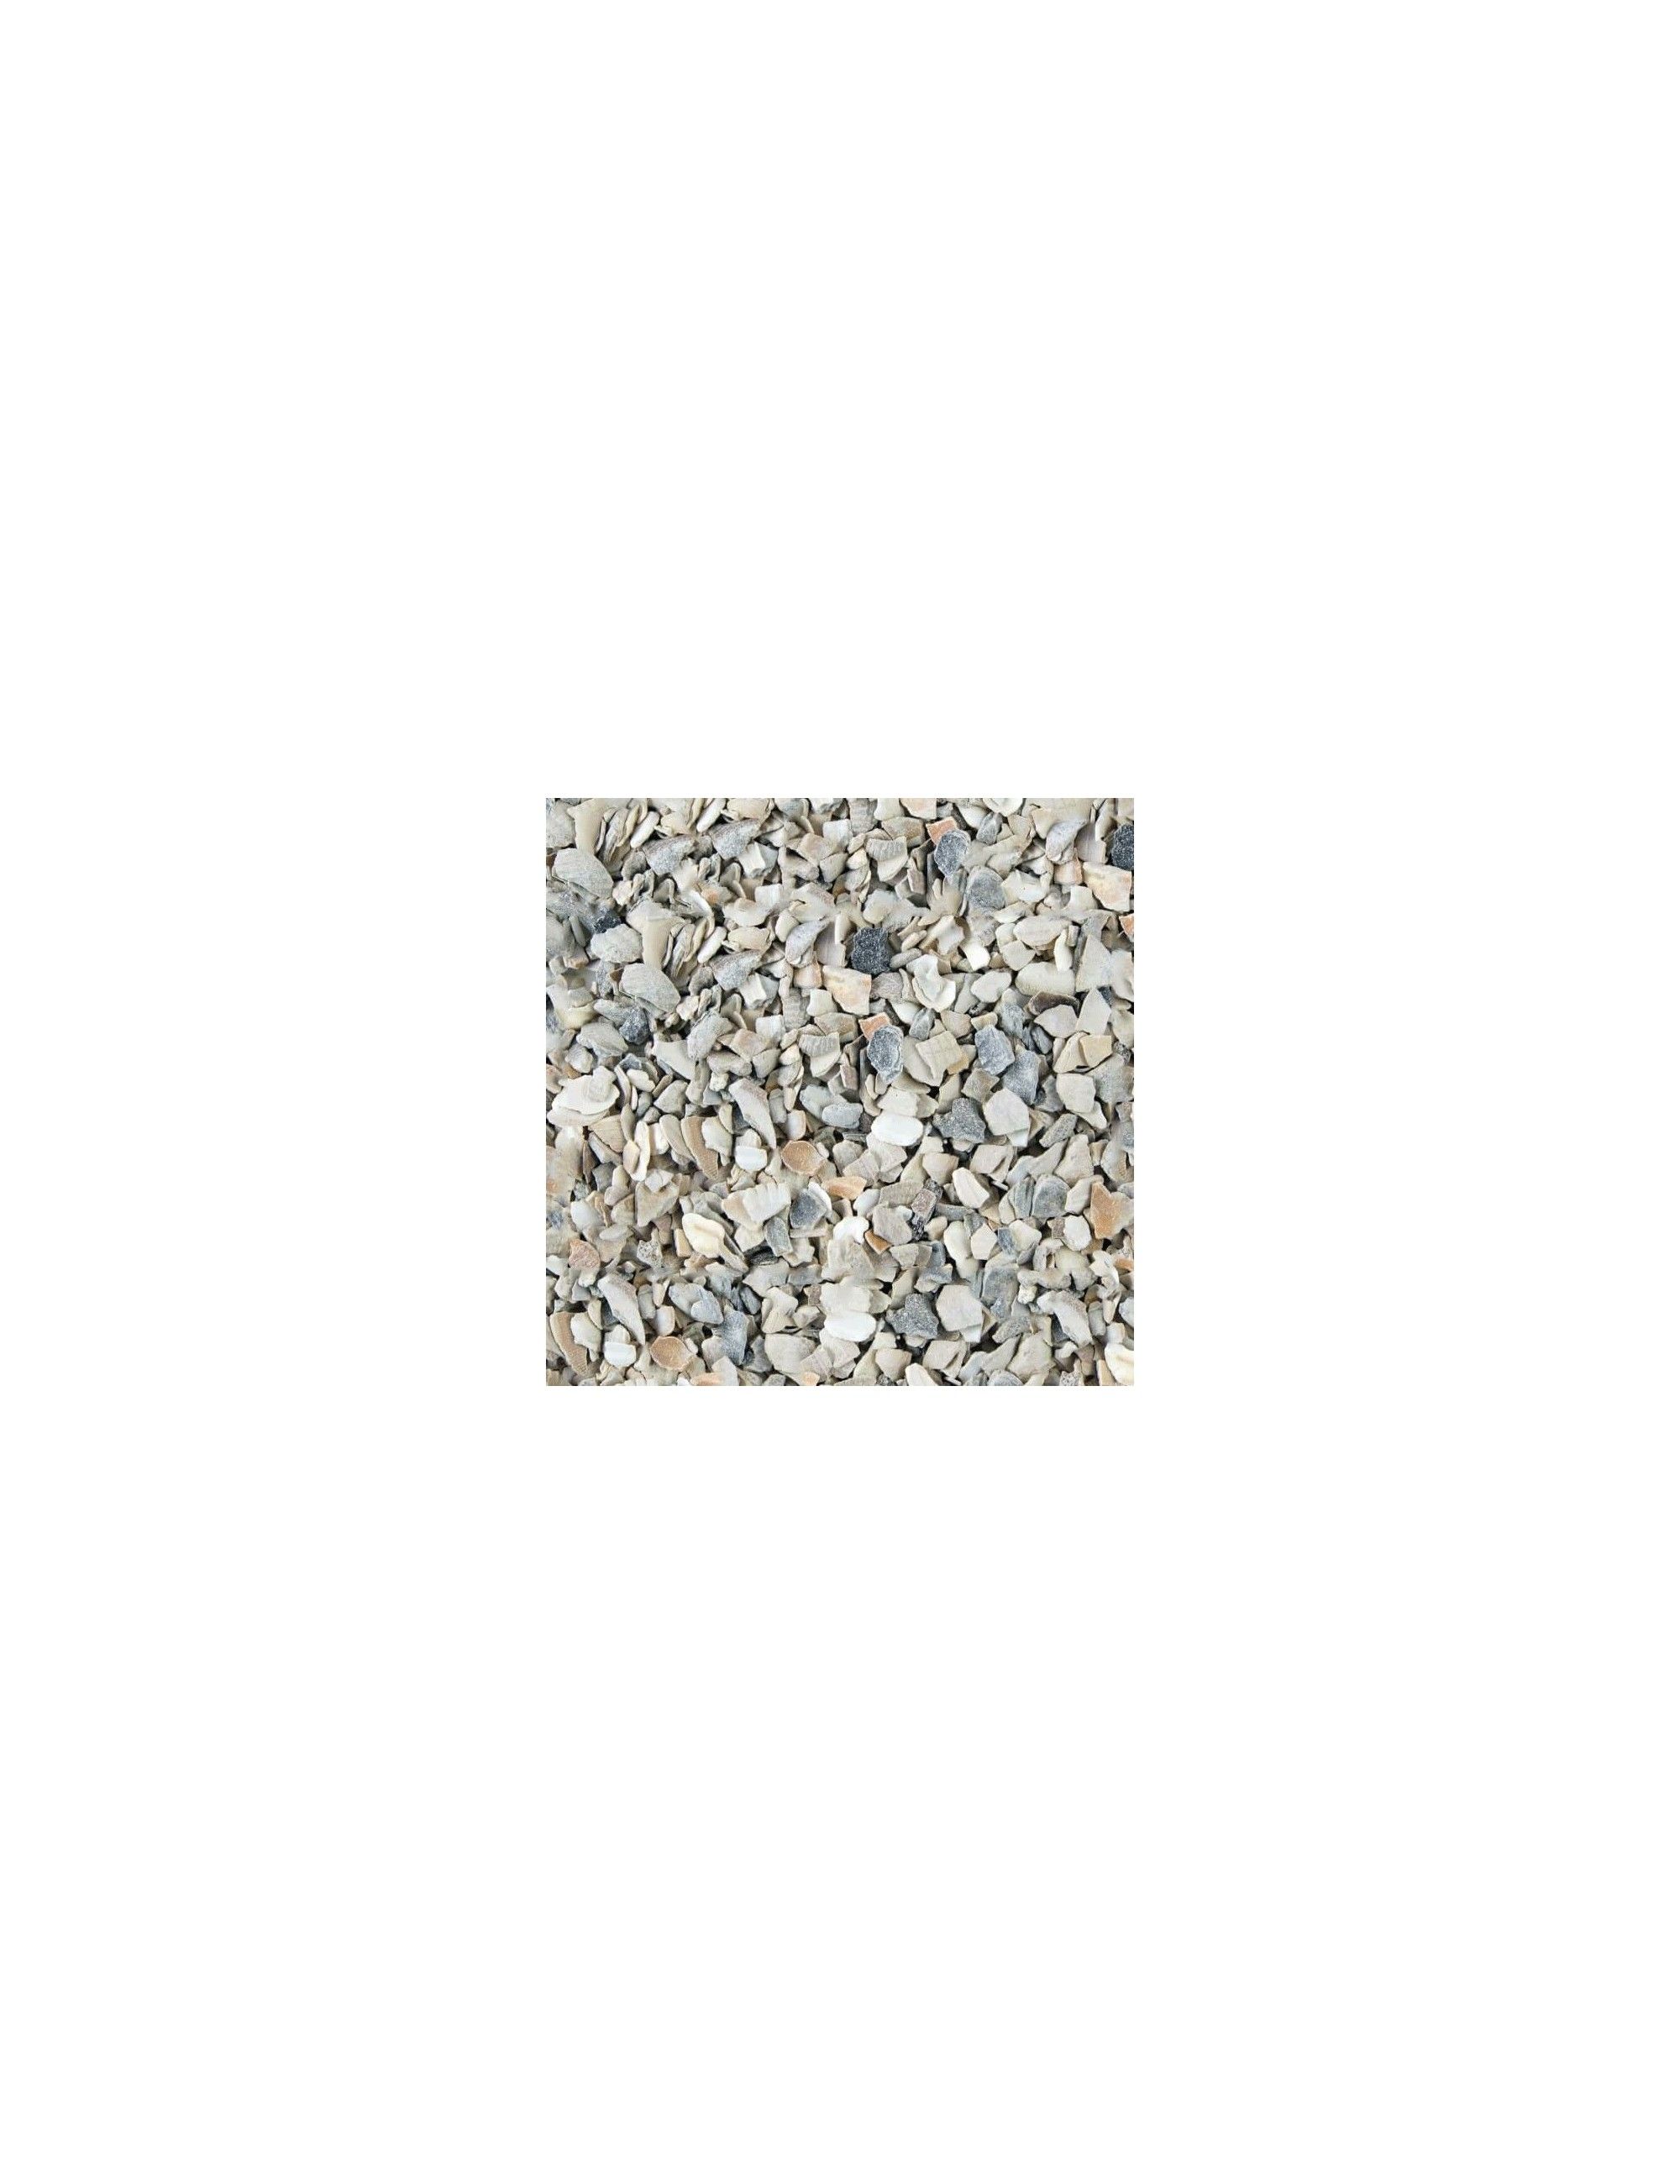 - Zoanthus.fr - Crushed oyster shells